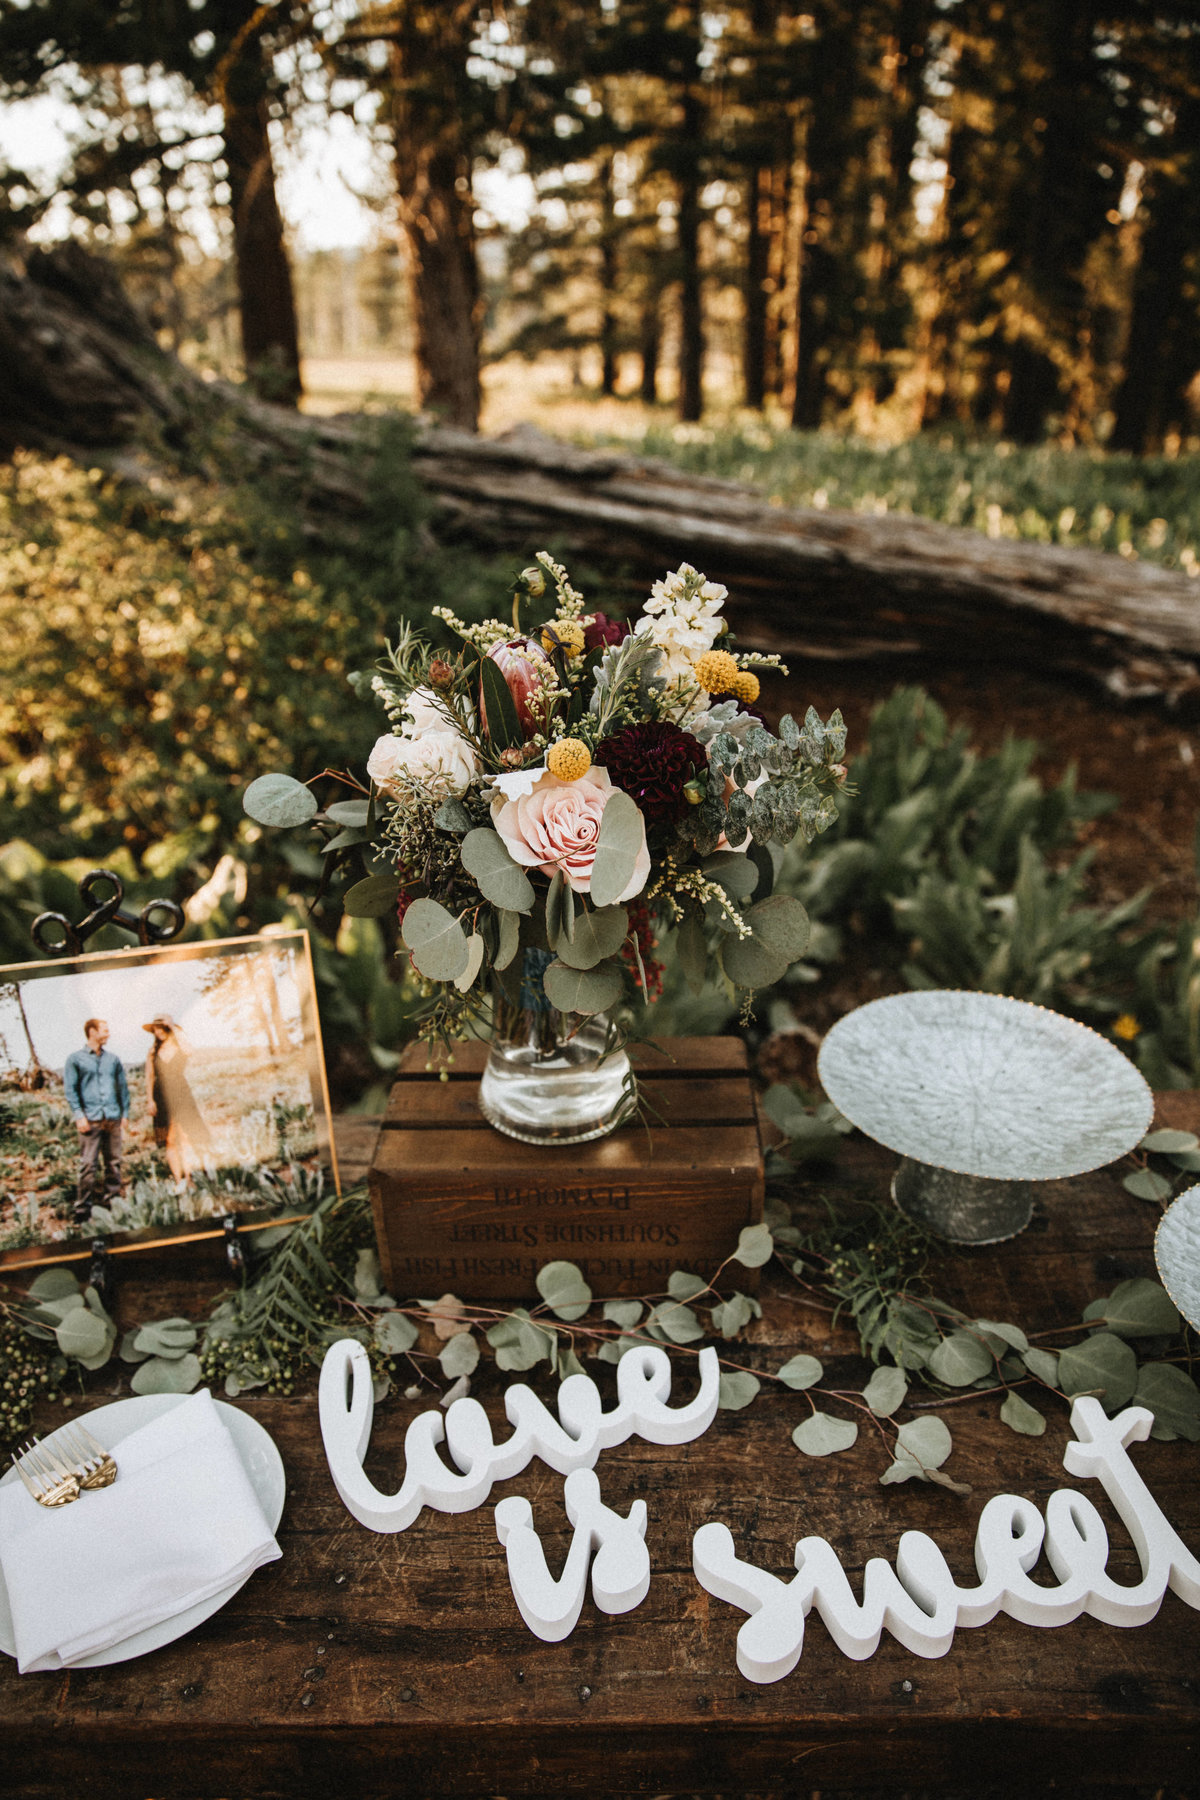 Tahoe Wedding Planners eucalyptus burgundy and white flowers at summer wedding venue Mitchell's Mountain Meadows Sierraville near Truckee, Joy of Life Events image by Lukas Koryn 2